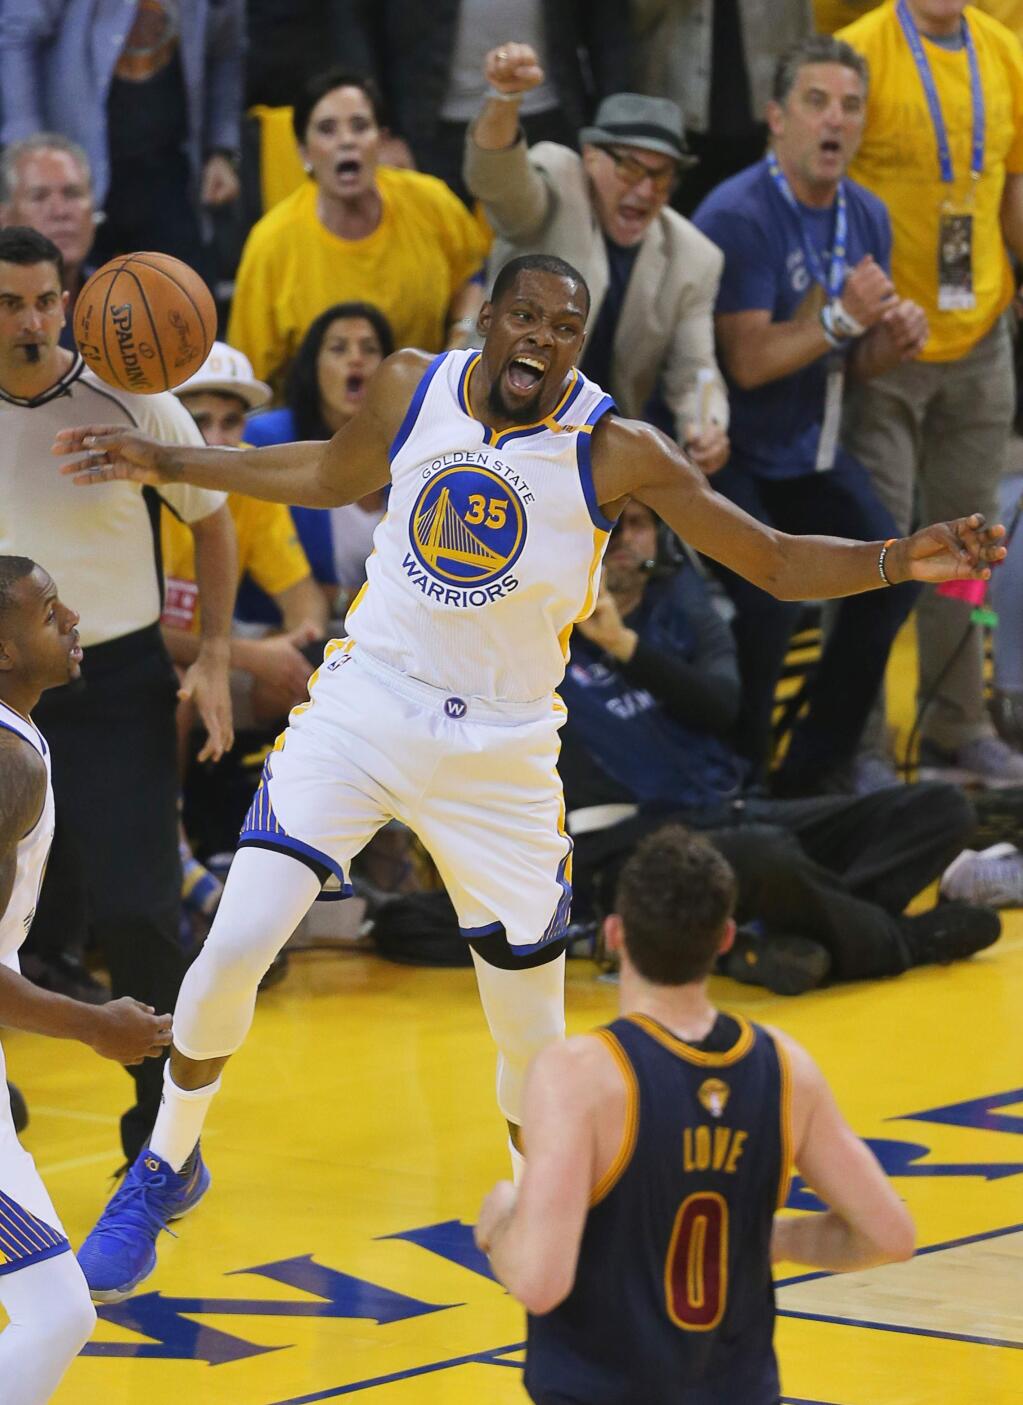 Golden State Warriors forward Kevin Durant lets out a yell after dunking the ball against the Cleveland Cavaliers during game 1 of the NBA Finals in Oakland on Thursday, June 1, 2017. (Christopher Chung/ The Press Democrat)